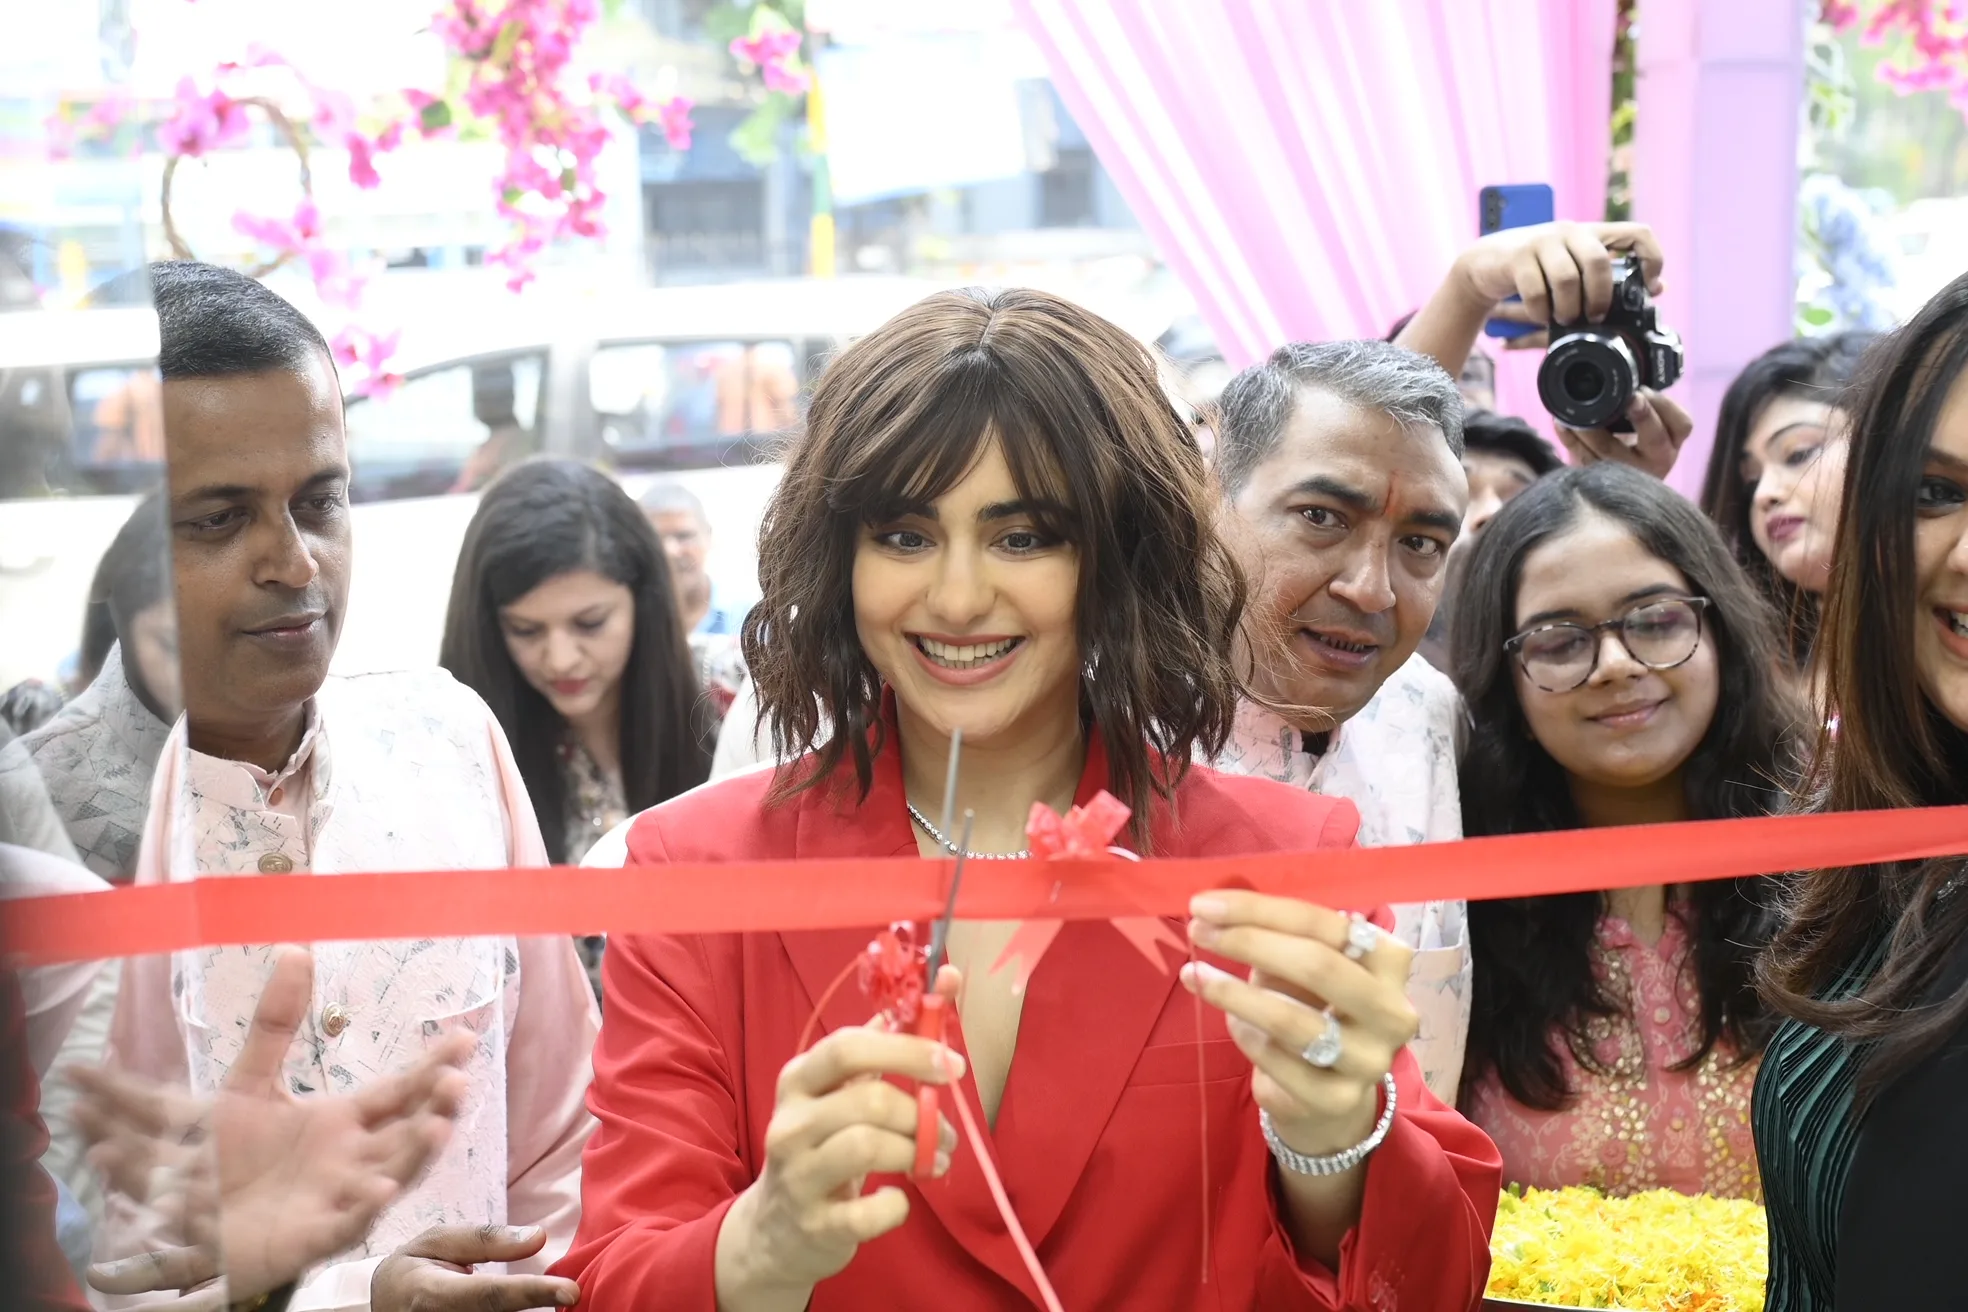 Limelight Diamonds Shines Bright with Grand Store Launch in Kolkata